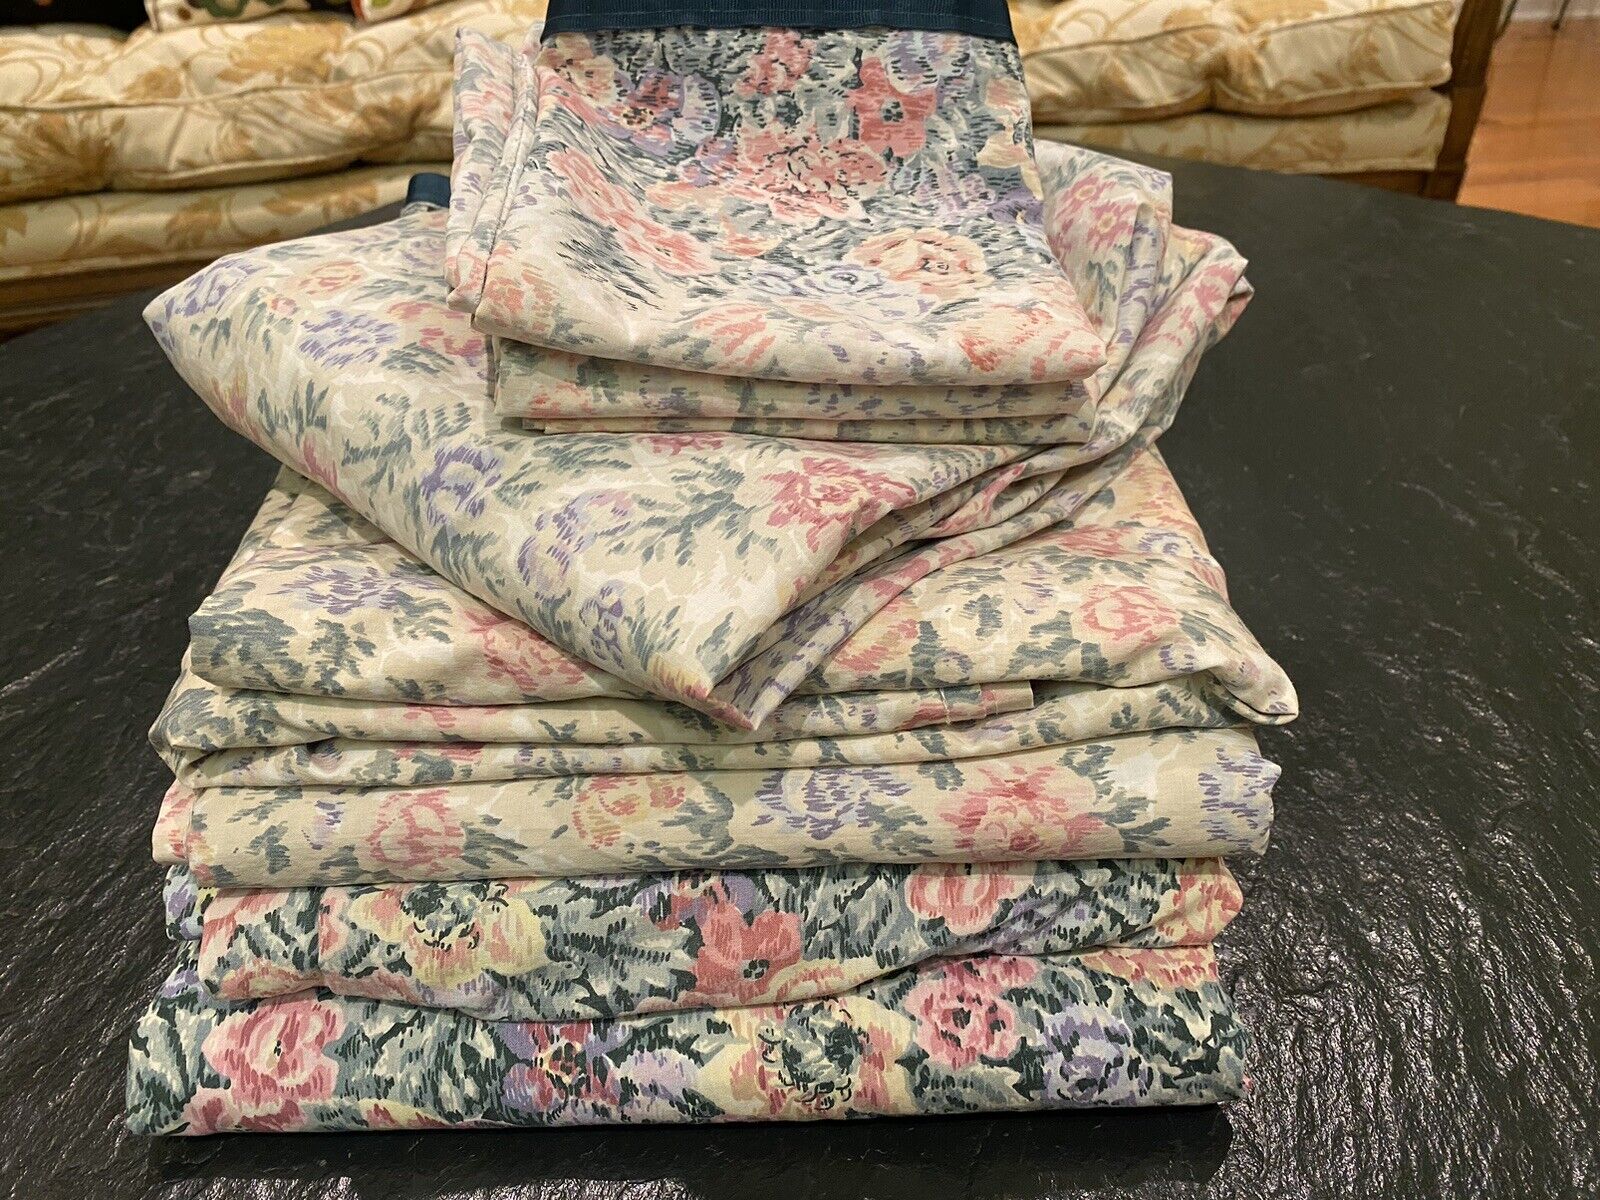 Vintage TWIN BEDROOM COLLECTION 2 Beds 8 Pc Duvet Covers & Sheets Floral Cottage